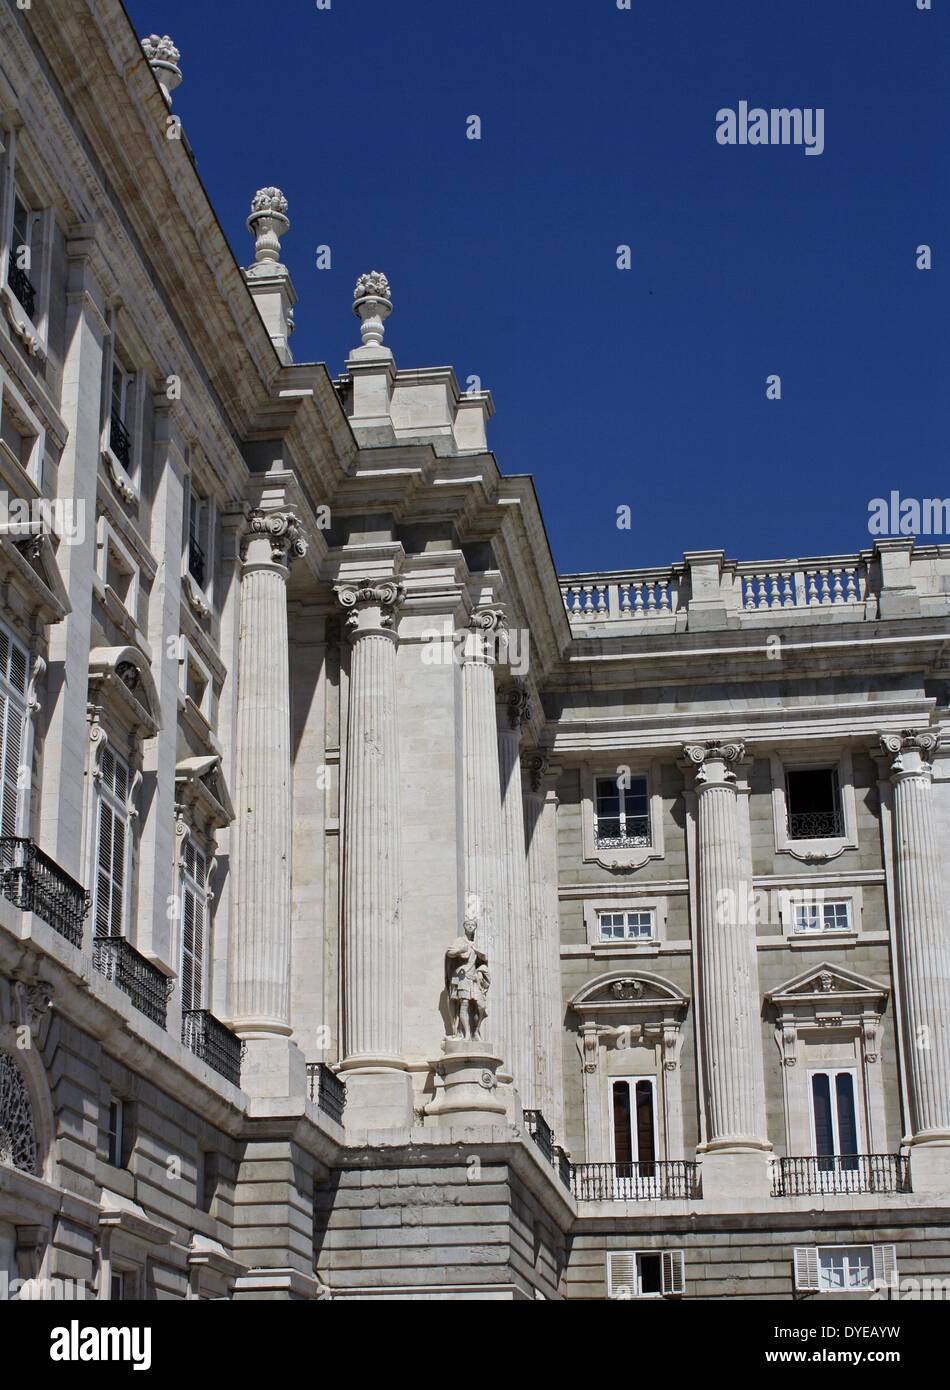 Views of the Royal Palace of Madrid. The official residence of the Spanish Royal Family although it is only used for state ceremonies. Built in a Baroque and Classicism style by architect Filippo Juvarra in 1738. Madrid. Spain 2013 Stock Photo